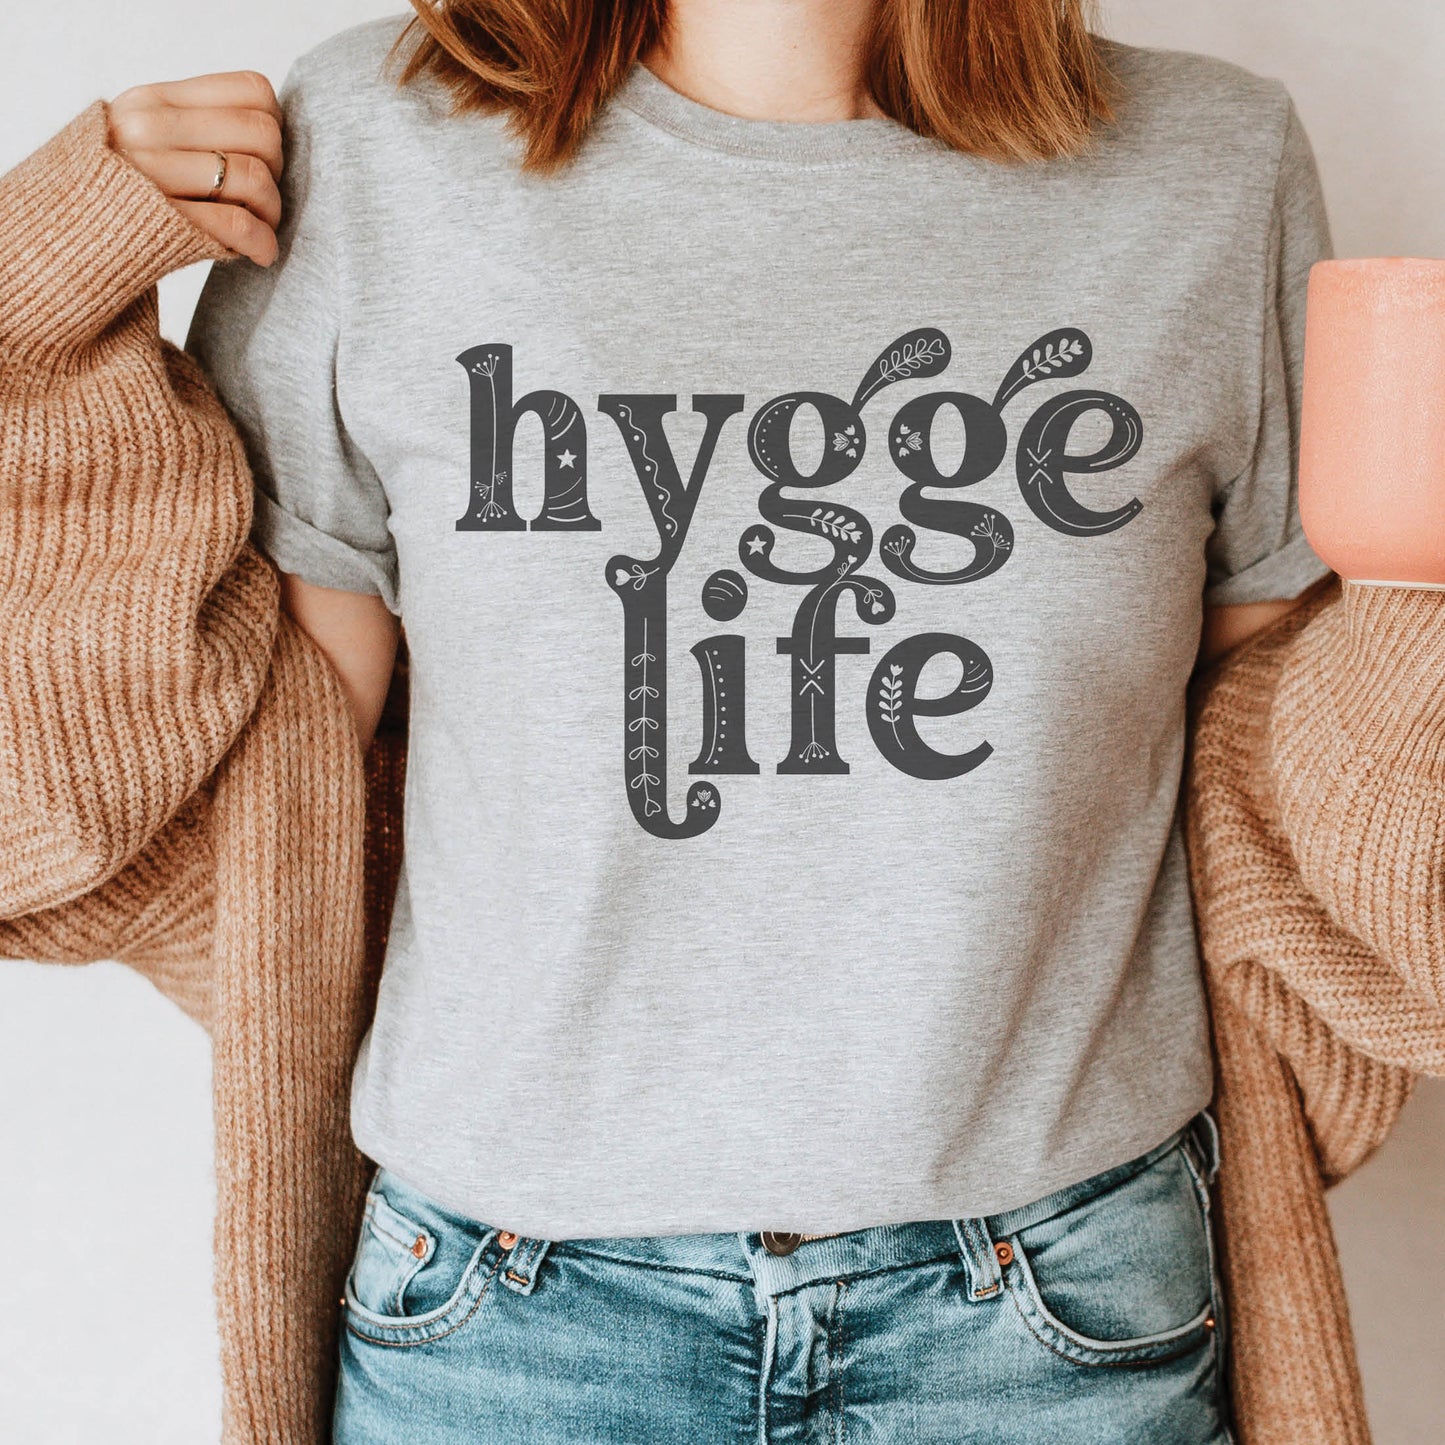 Coziness vibes woman wearing a heather gray Hygge Life Holy Hygge Women's unisex Christian t-shirt with Scandinavian floral and heart art for the cozy fall and winter season